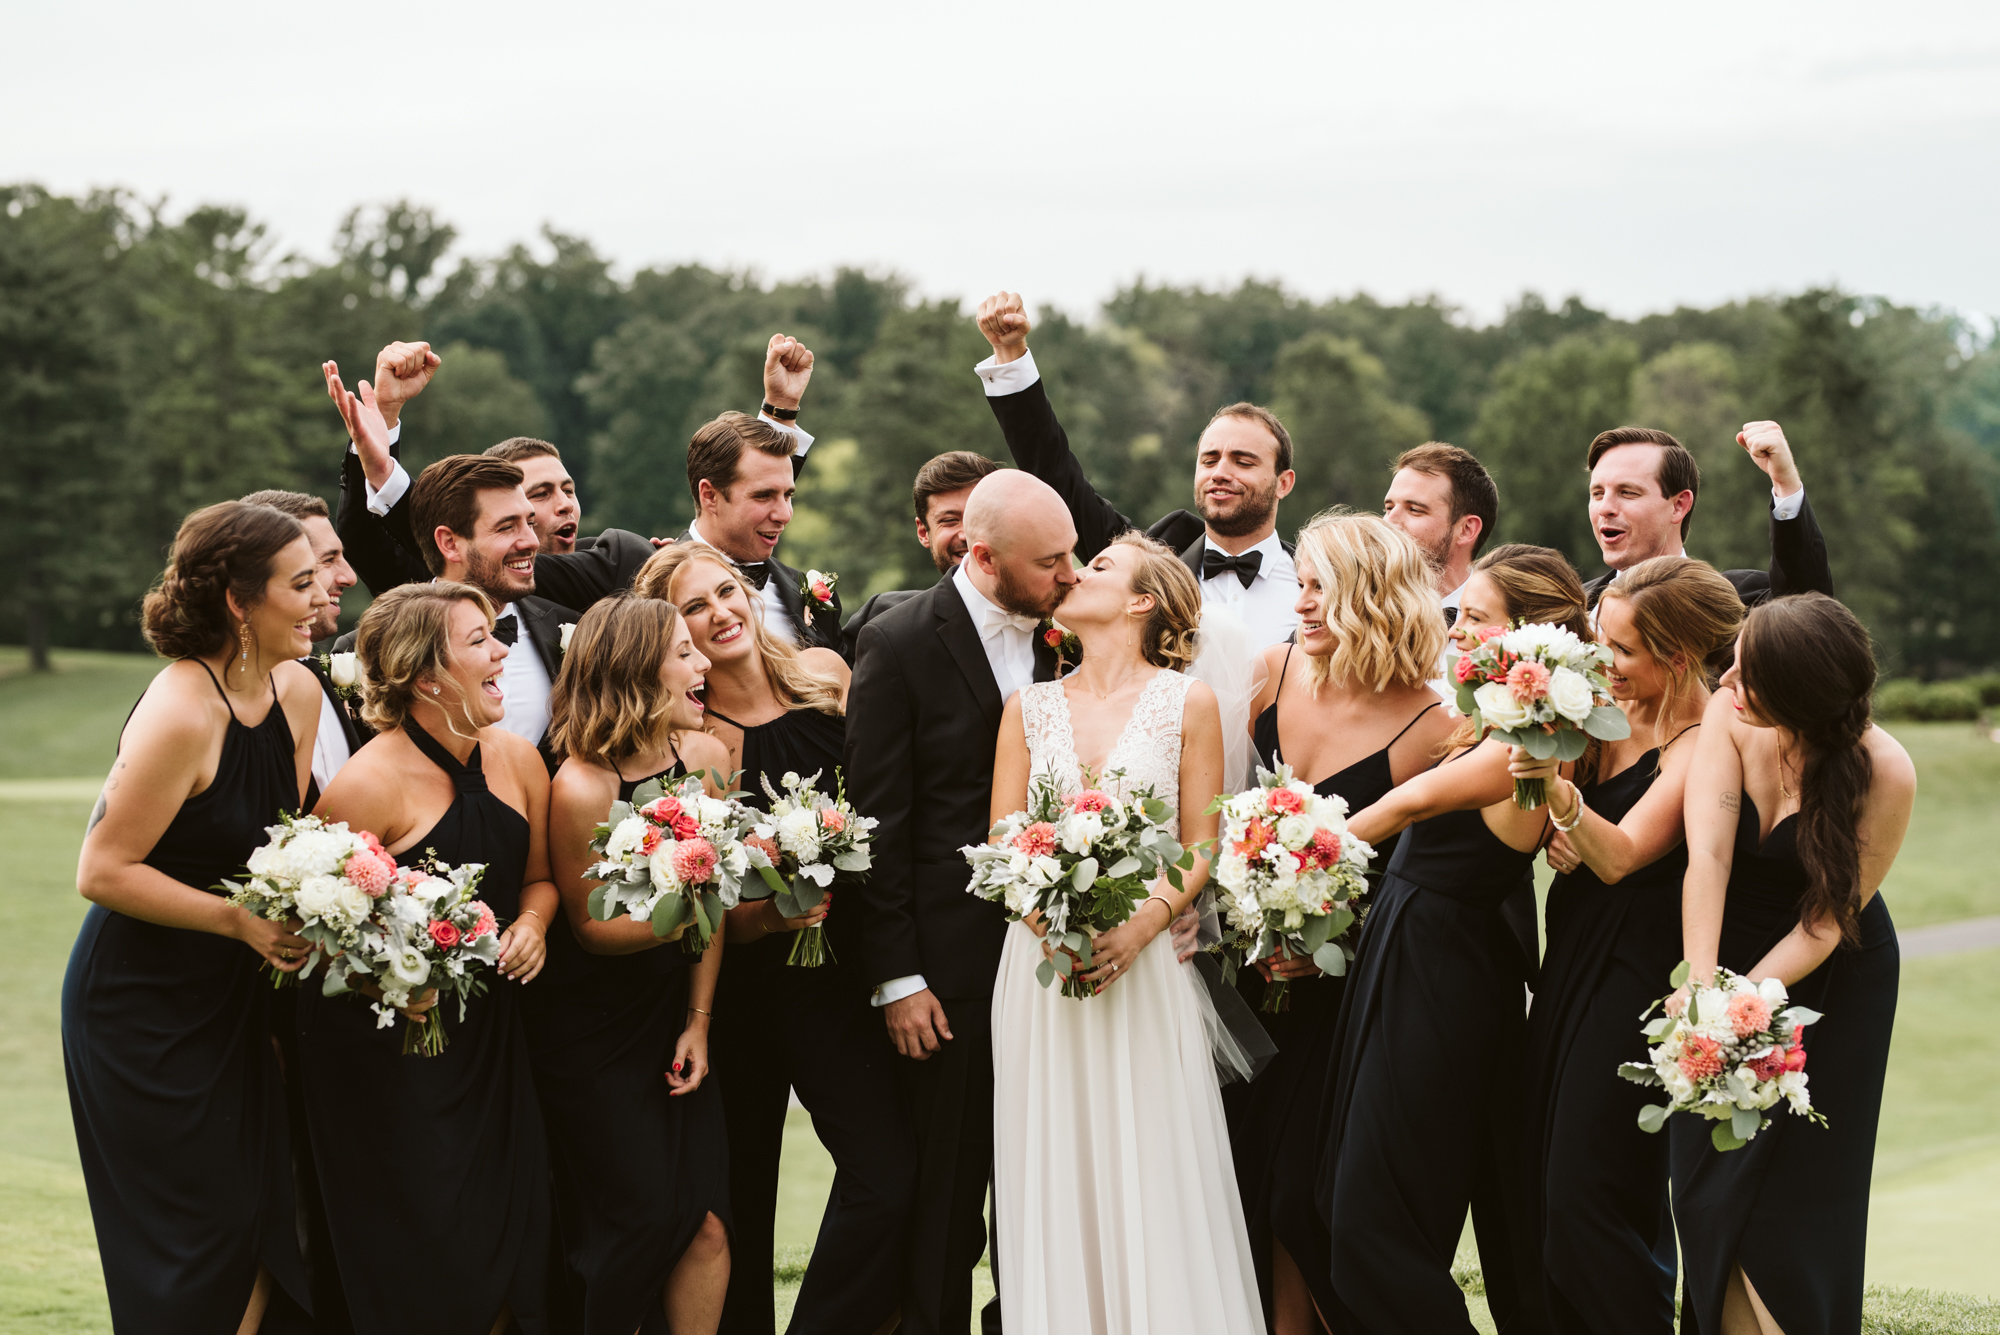 Elegant, Columbia Country Club, Chevy Chase Maryland, Baltimore Wedding Photographer, Classic, Traditional, BHLDN, Shona Joy, Golf Course, Bride and Groom Kissing with Wedding Party Cheering